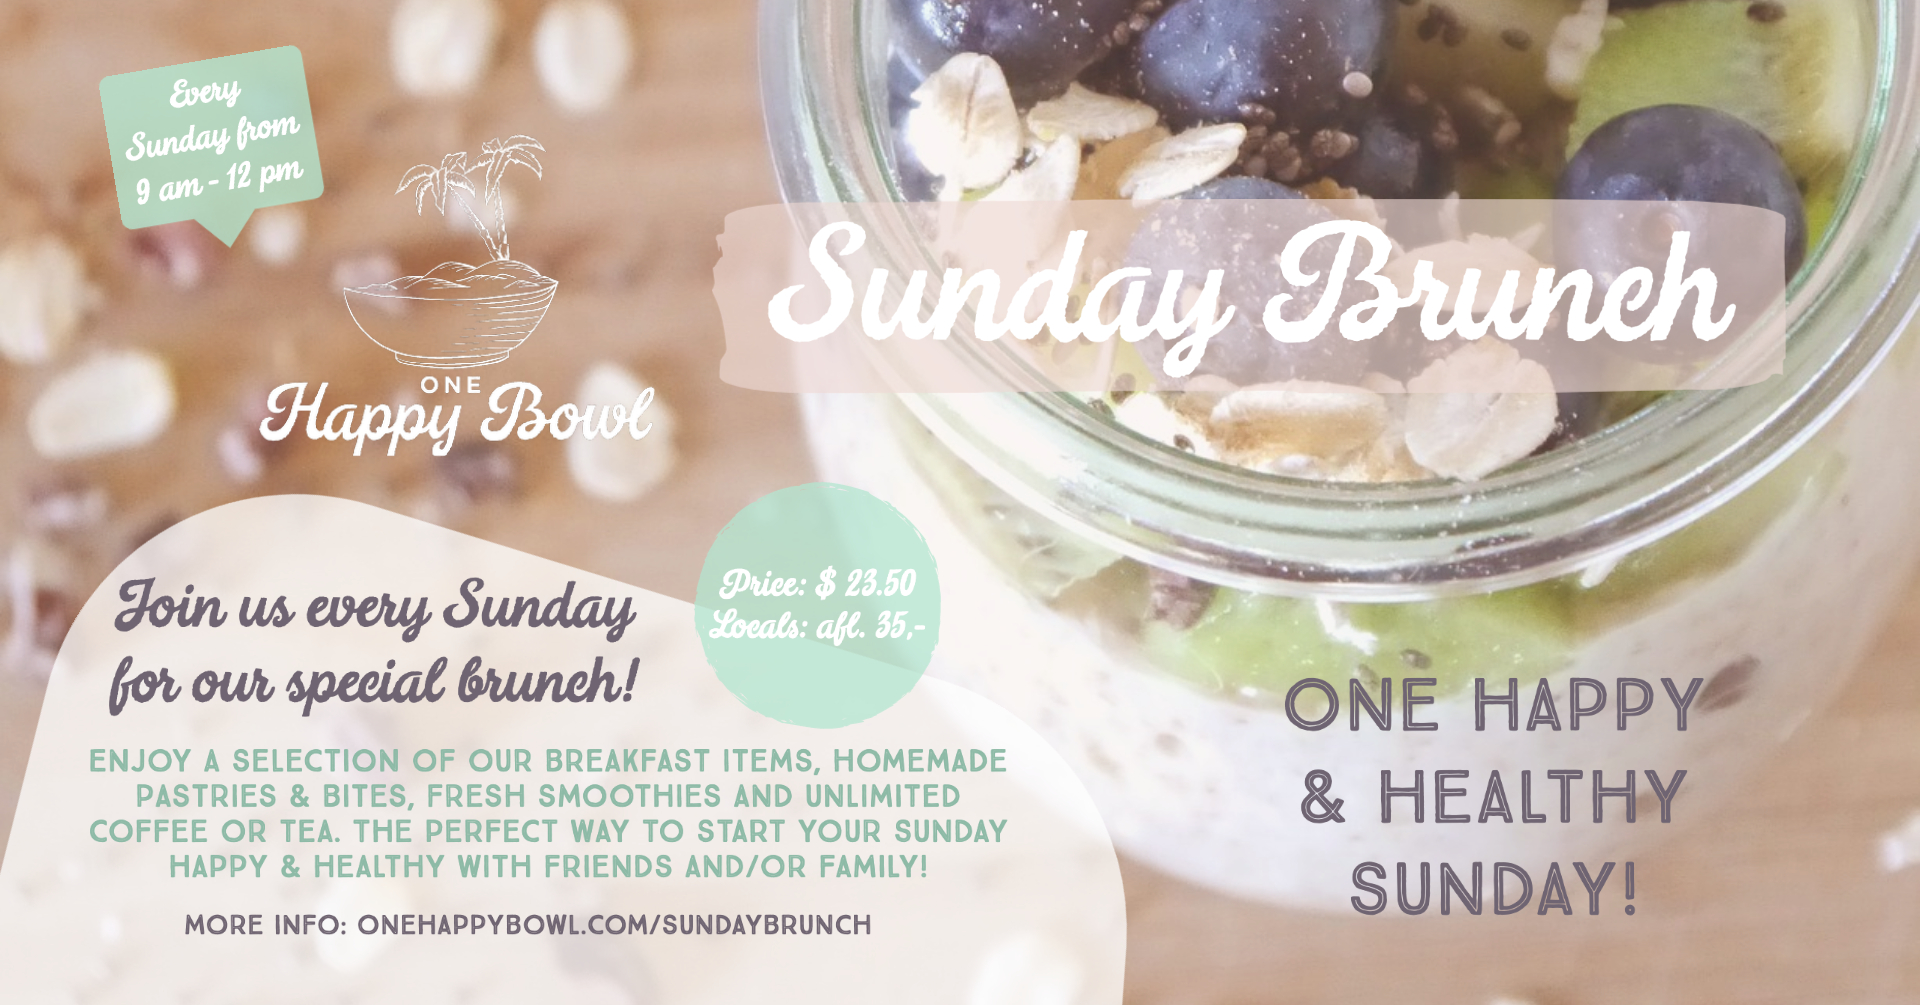 Join our Brunch every Sunday!